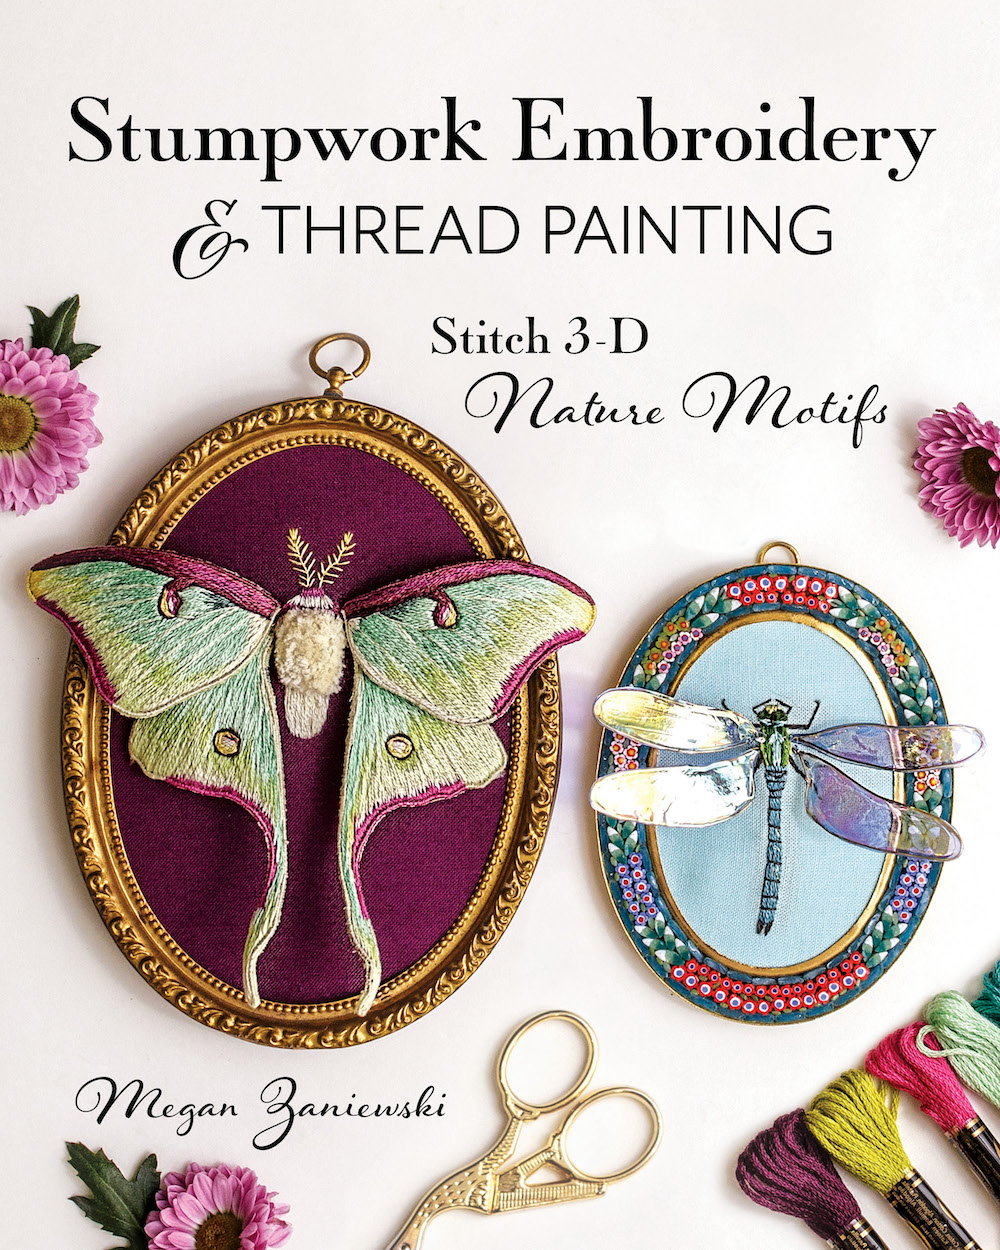 Learn How to Thread Paint and Create Stumpwork Embroidery in Megan Zaniewski’s New Book